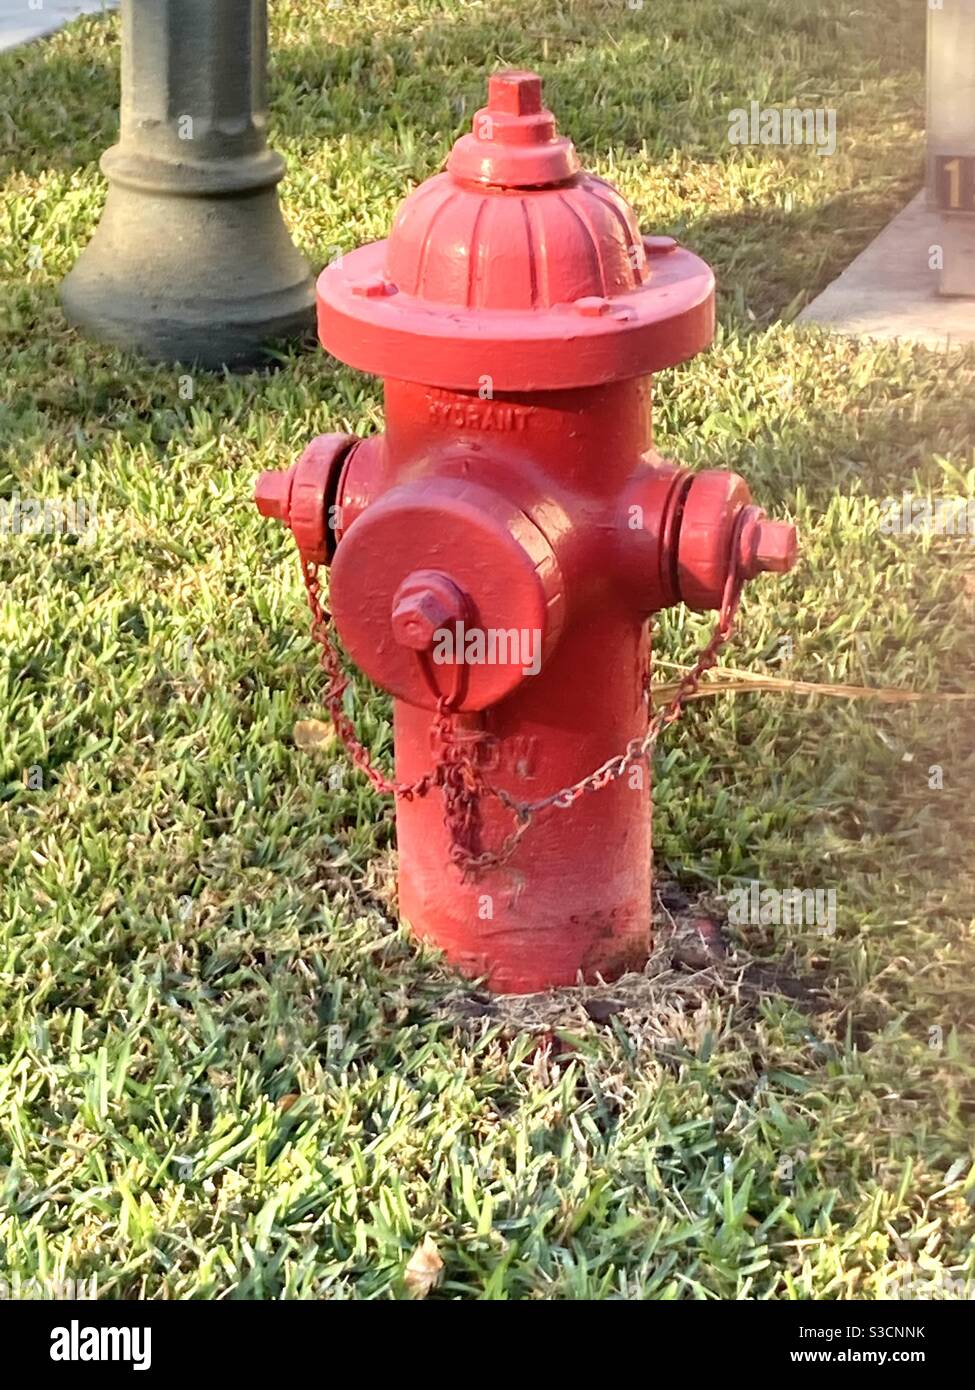 23" Old School Vintage Style Fire Hydrant Garden Statue Red Metal 3 Nozzle ~ New 